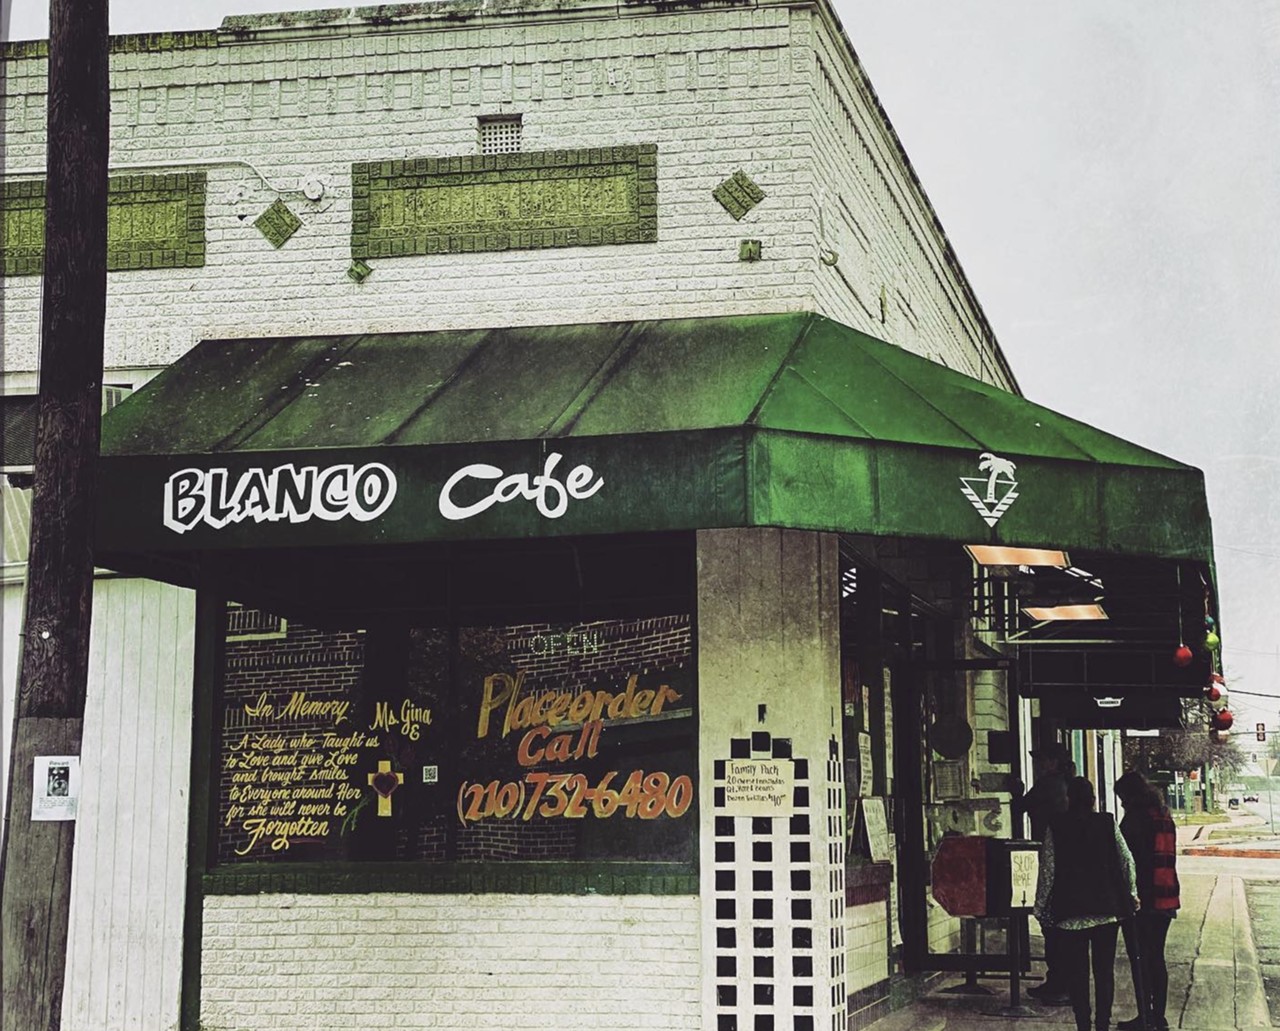 There can never be too many restaurants called Blanco Café.
Photo via Instagram / wtfdusk